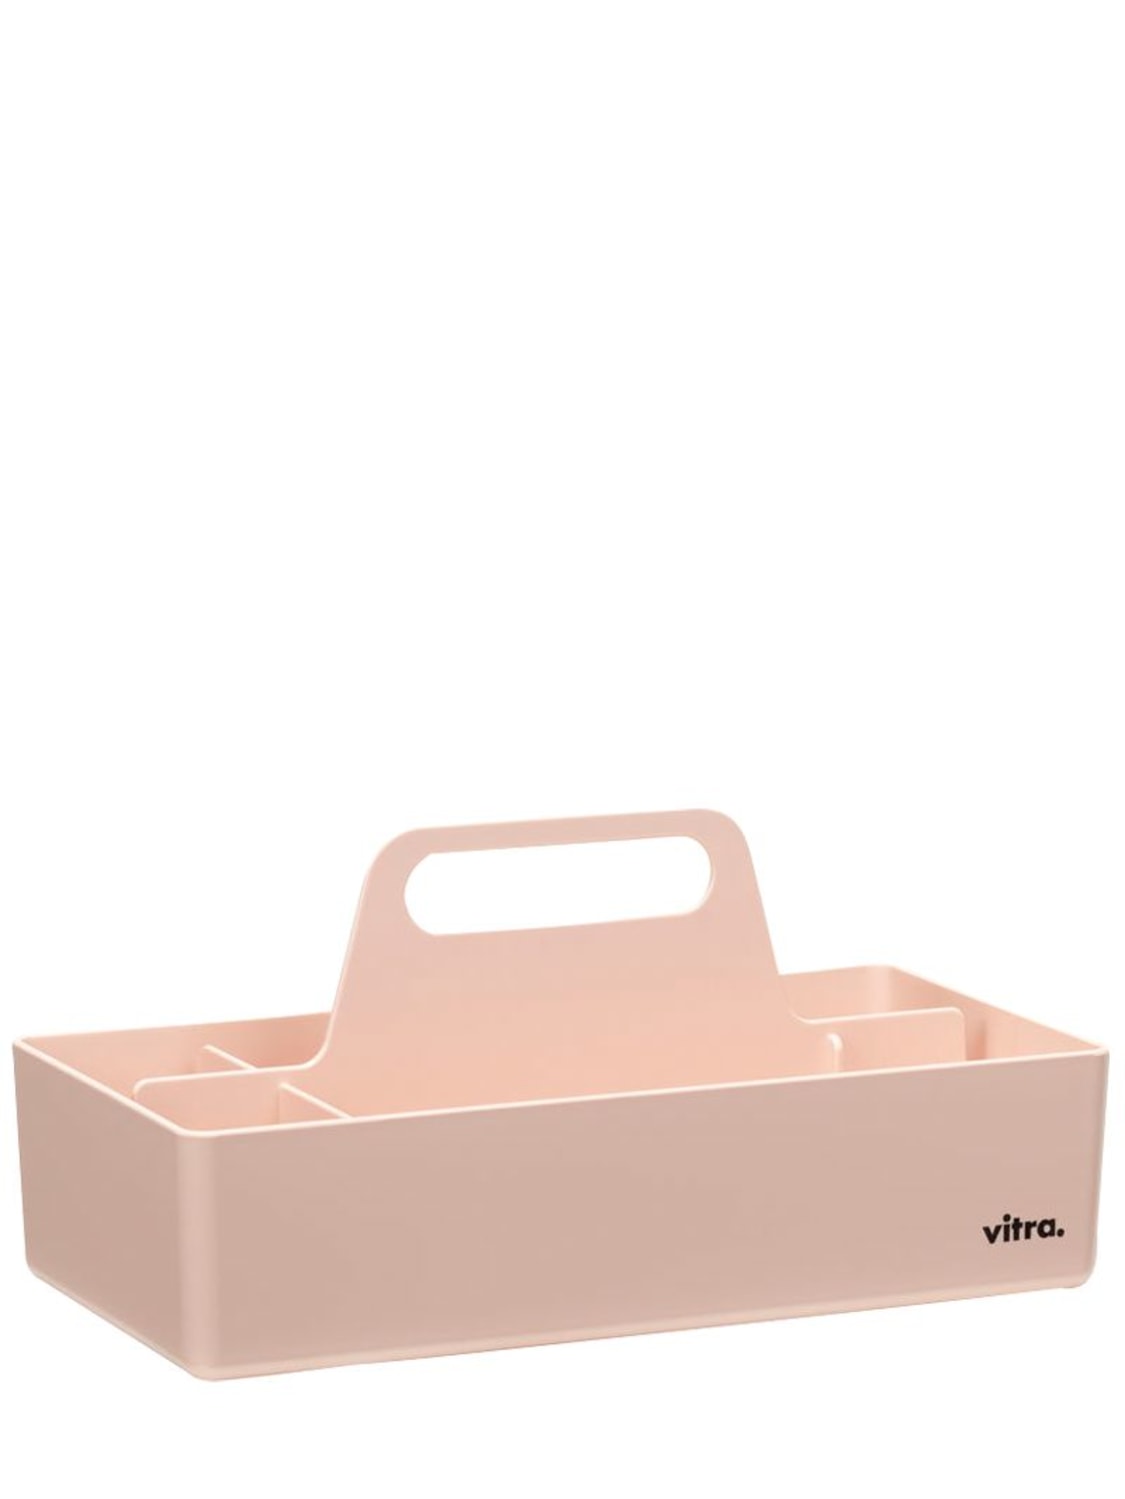 Vitra Toolbox In Pink